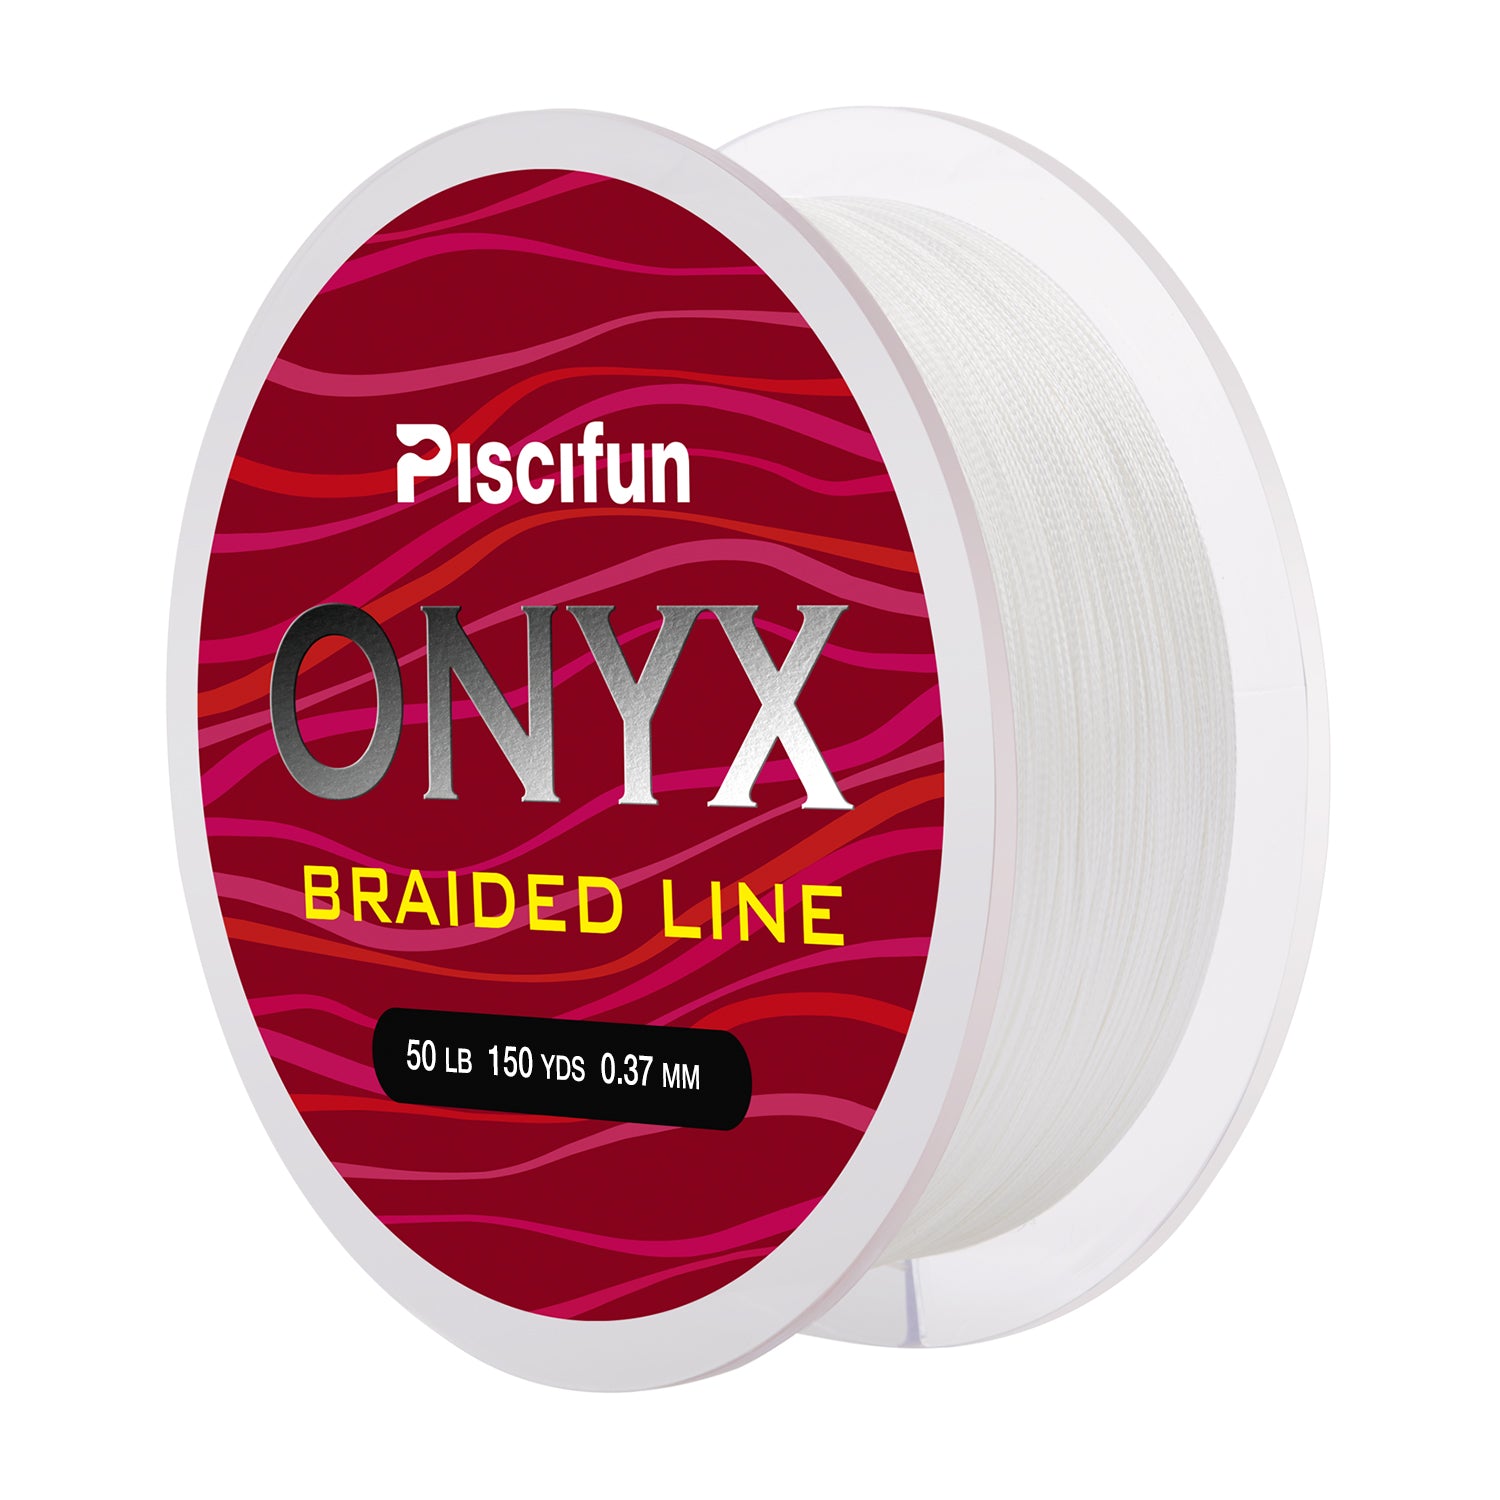 Piscifun Onyx Braided Fishing Line 6lb-150lb Superline Abrasion Resistant  Braided Lines Super Strong High Performance PE Fishing Lines - Buy Online -  61324304